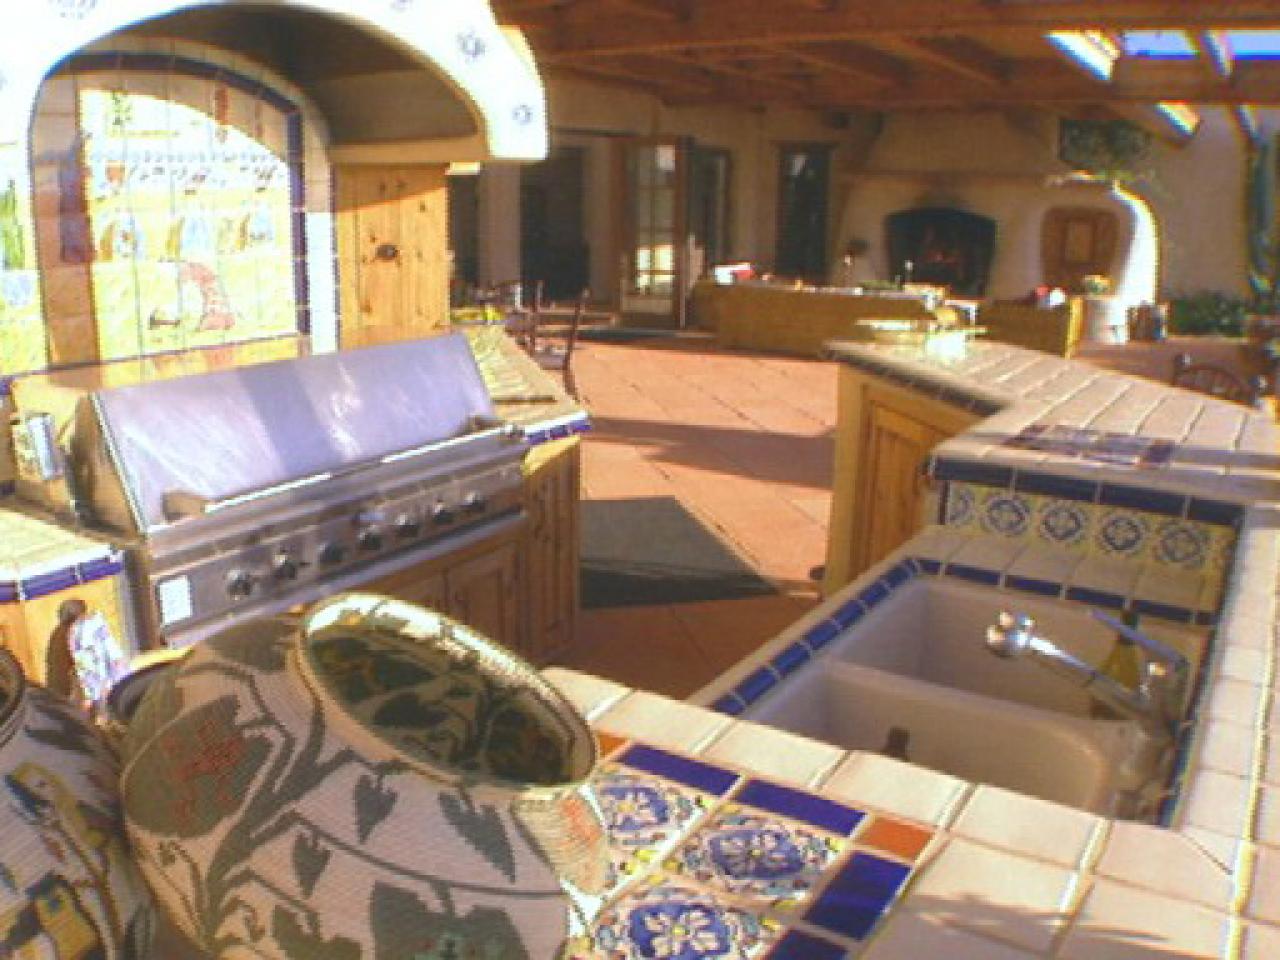 dbhb210_3ca. This colorful outdoor kitchen features tile countertops ...